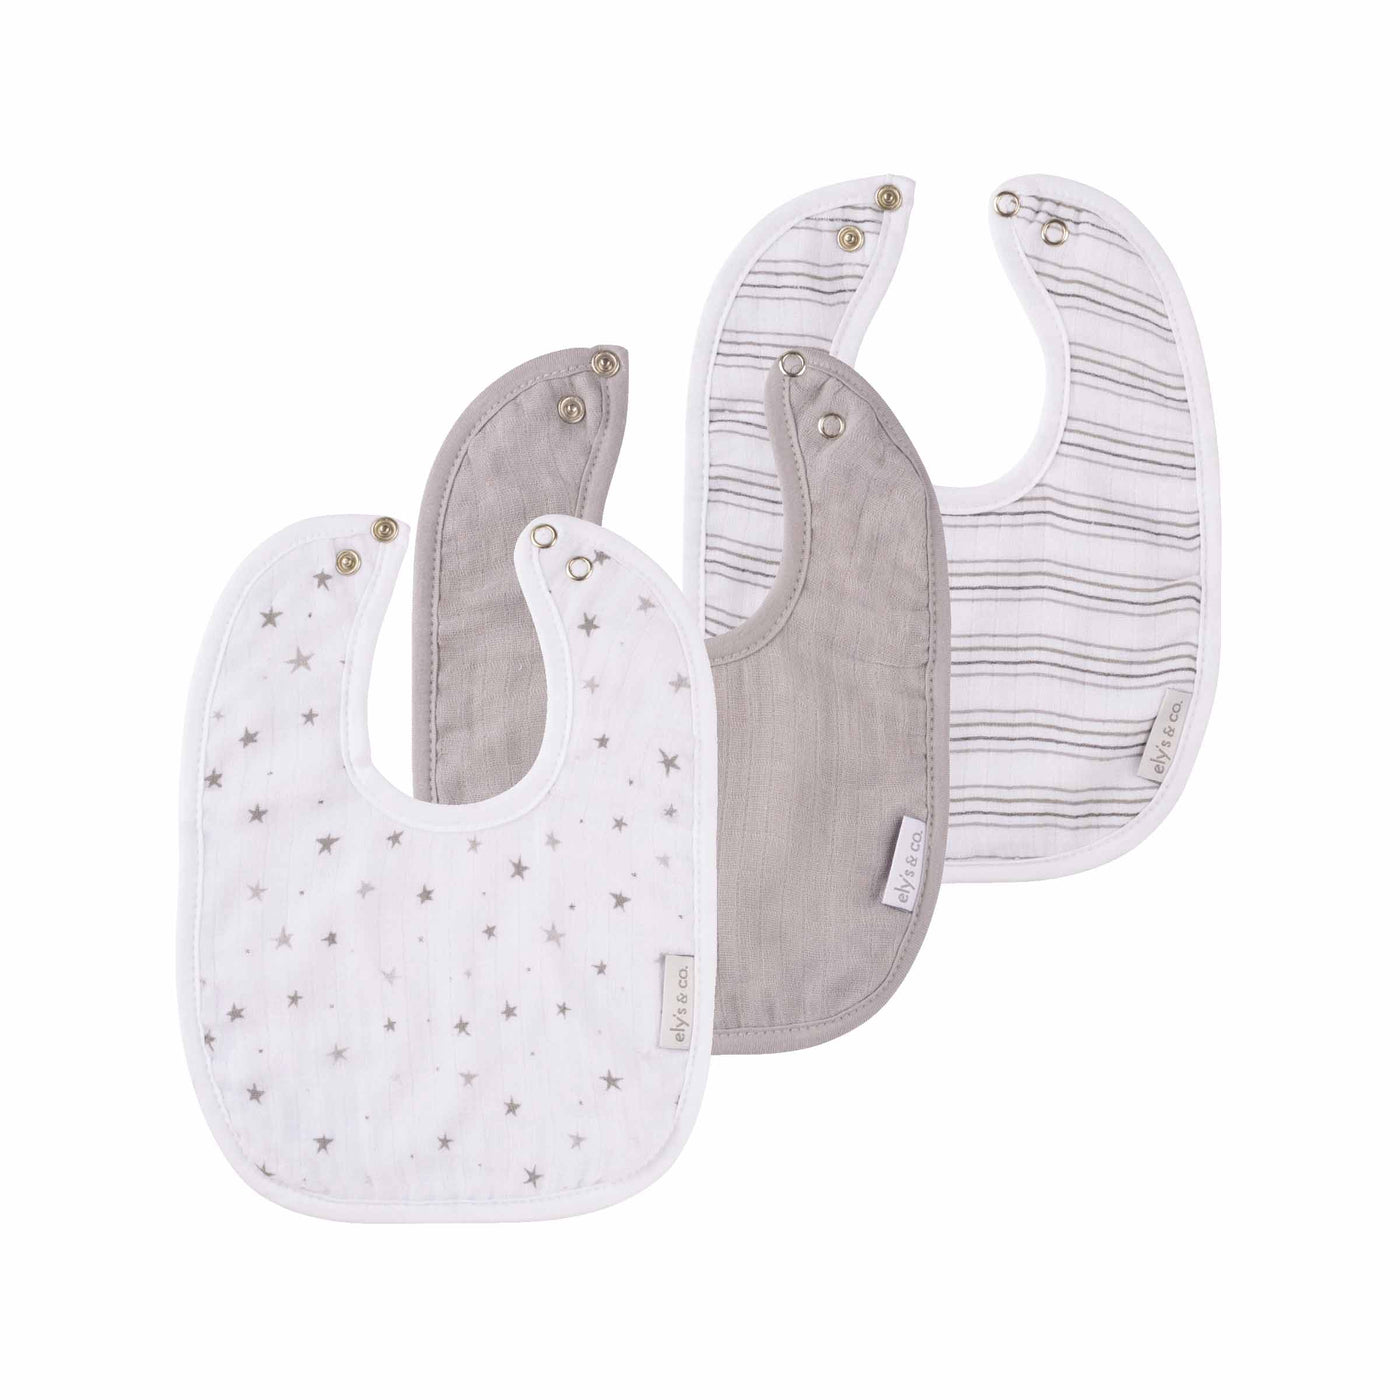 Ely's & Co. 3 Pack Bibs - Gray Stripe Collection